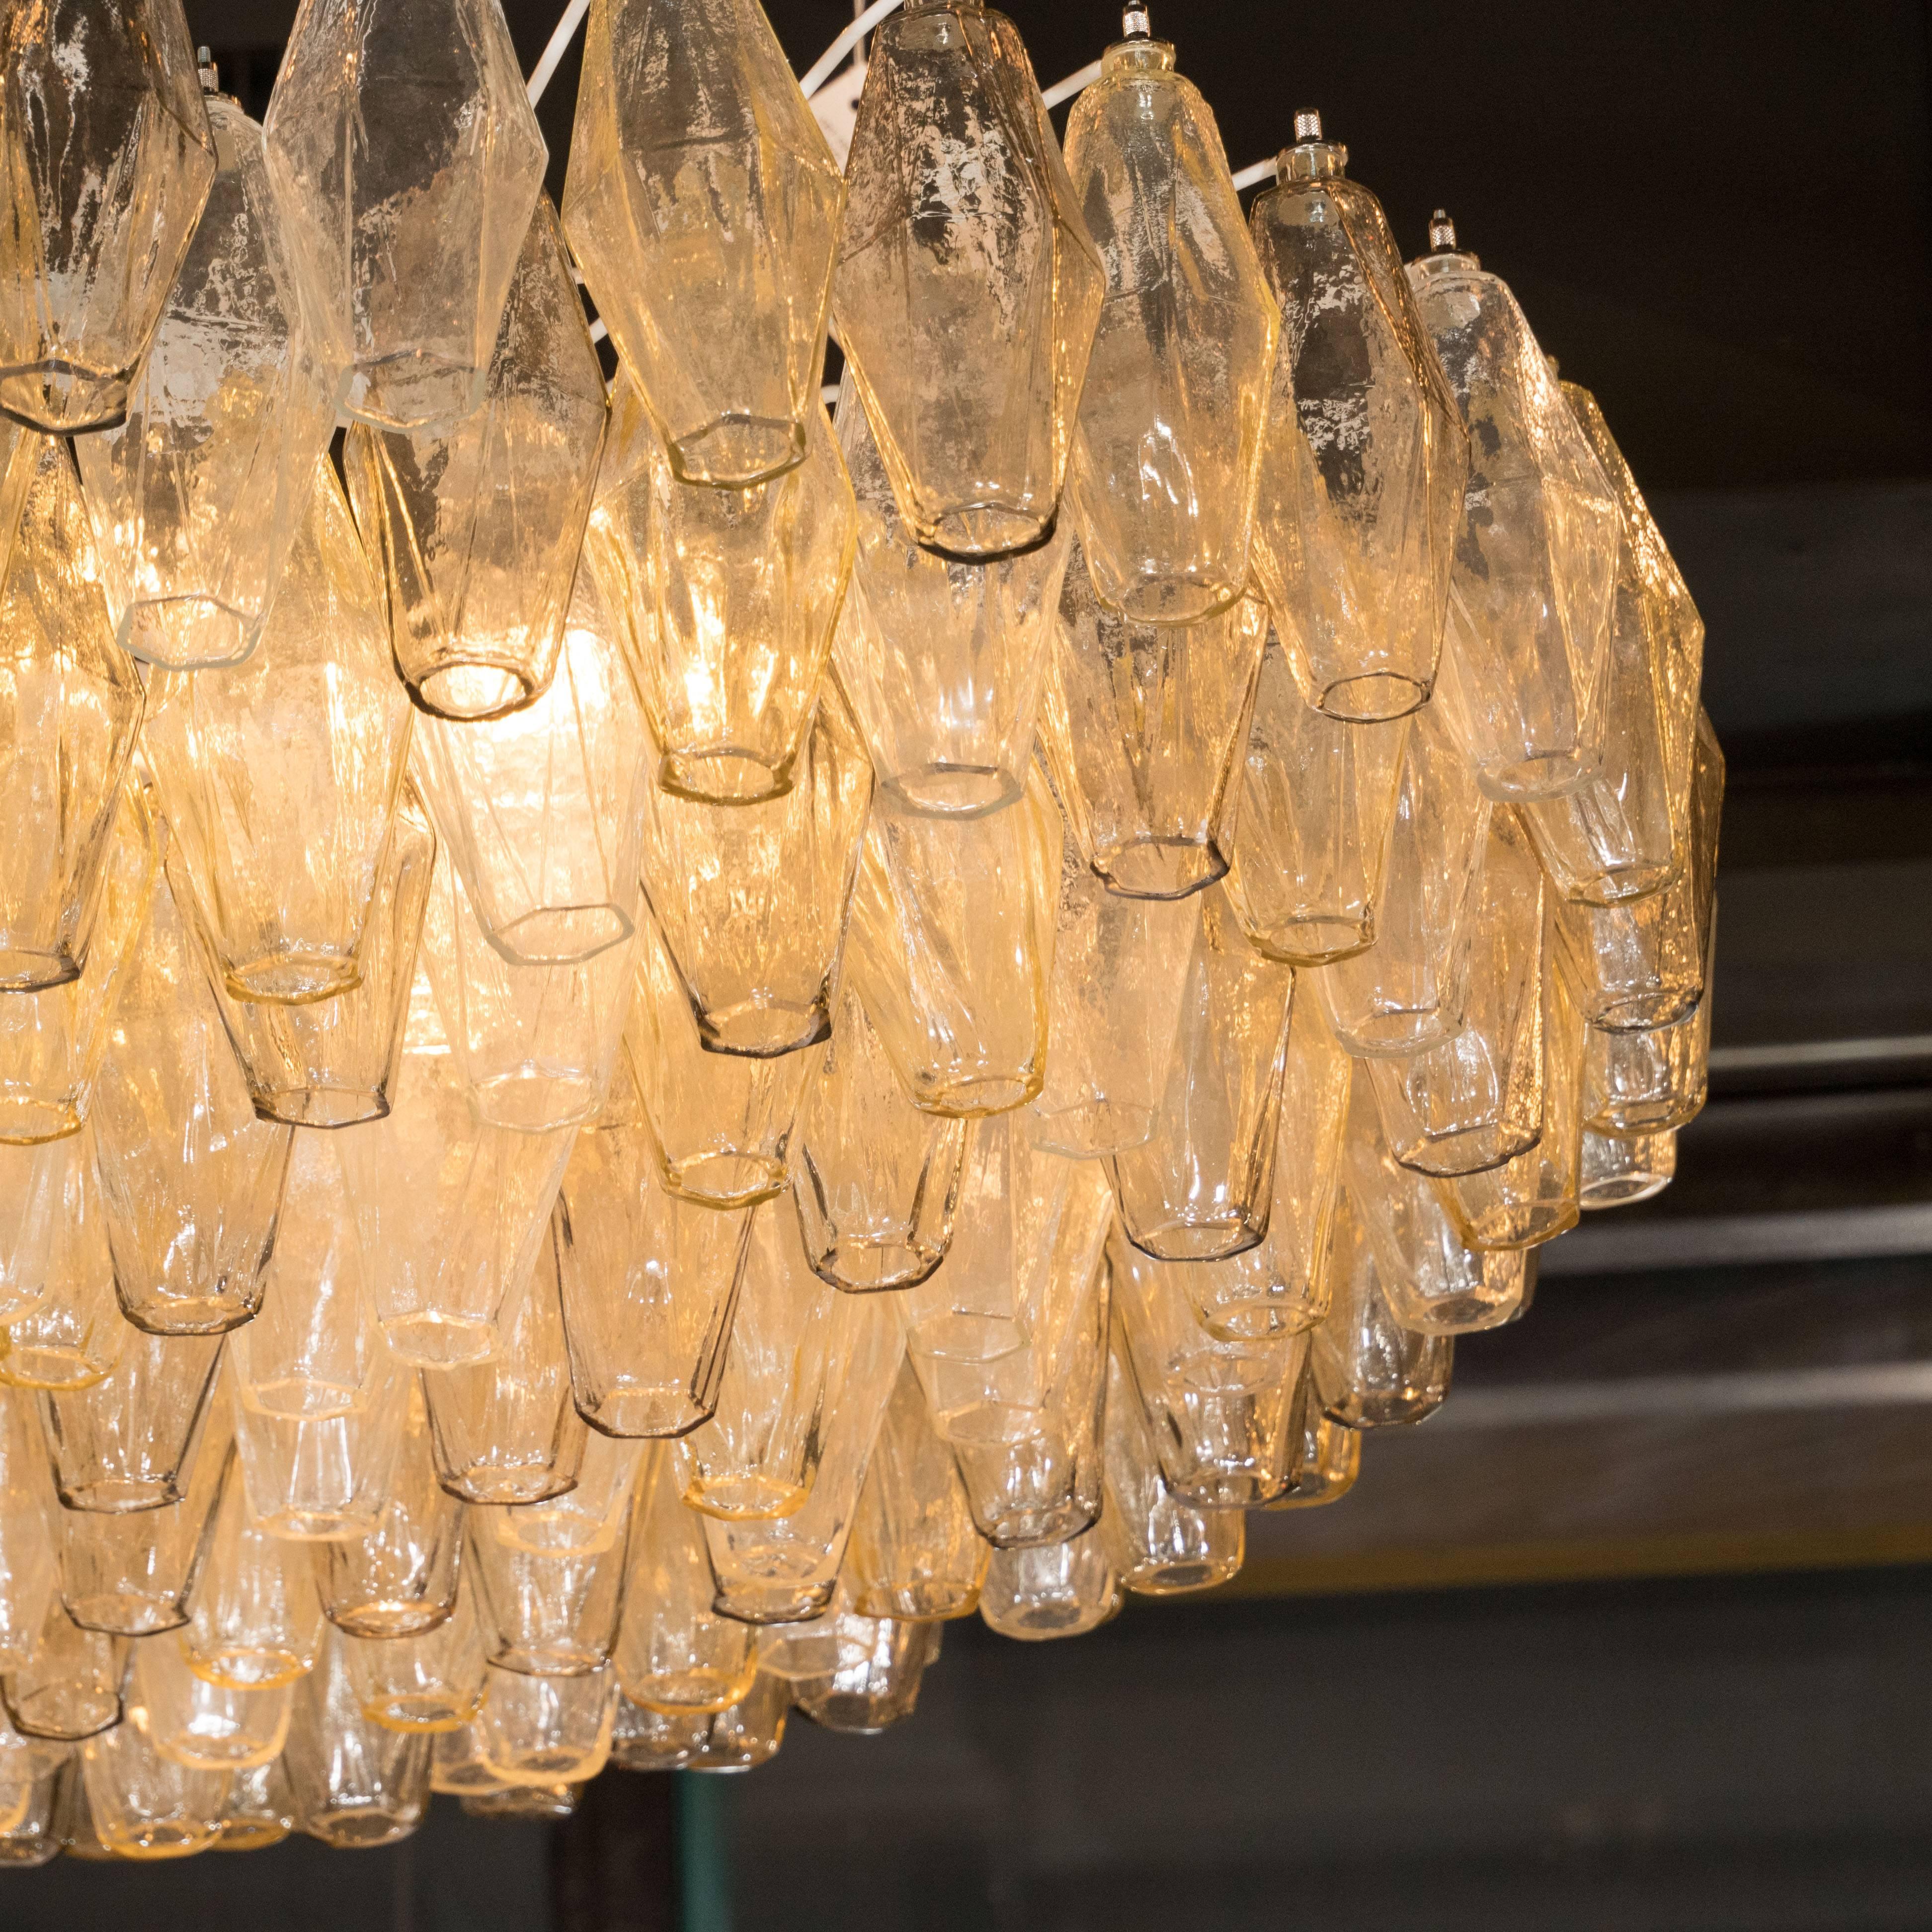 Polished Modernist Murano Polyhedral Venini Chandelier, Nickel Fittings in Smoked Topaz